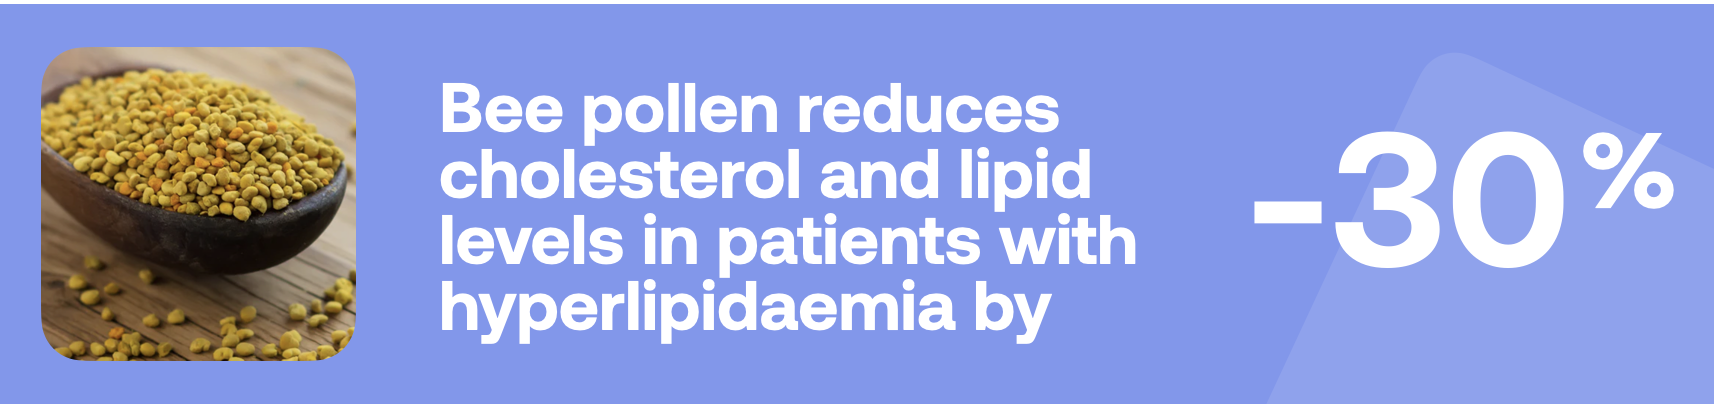 Bee pollen reduces cholesterol and lipid levels in patients with hyperlipidaemia by -30%